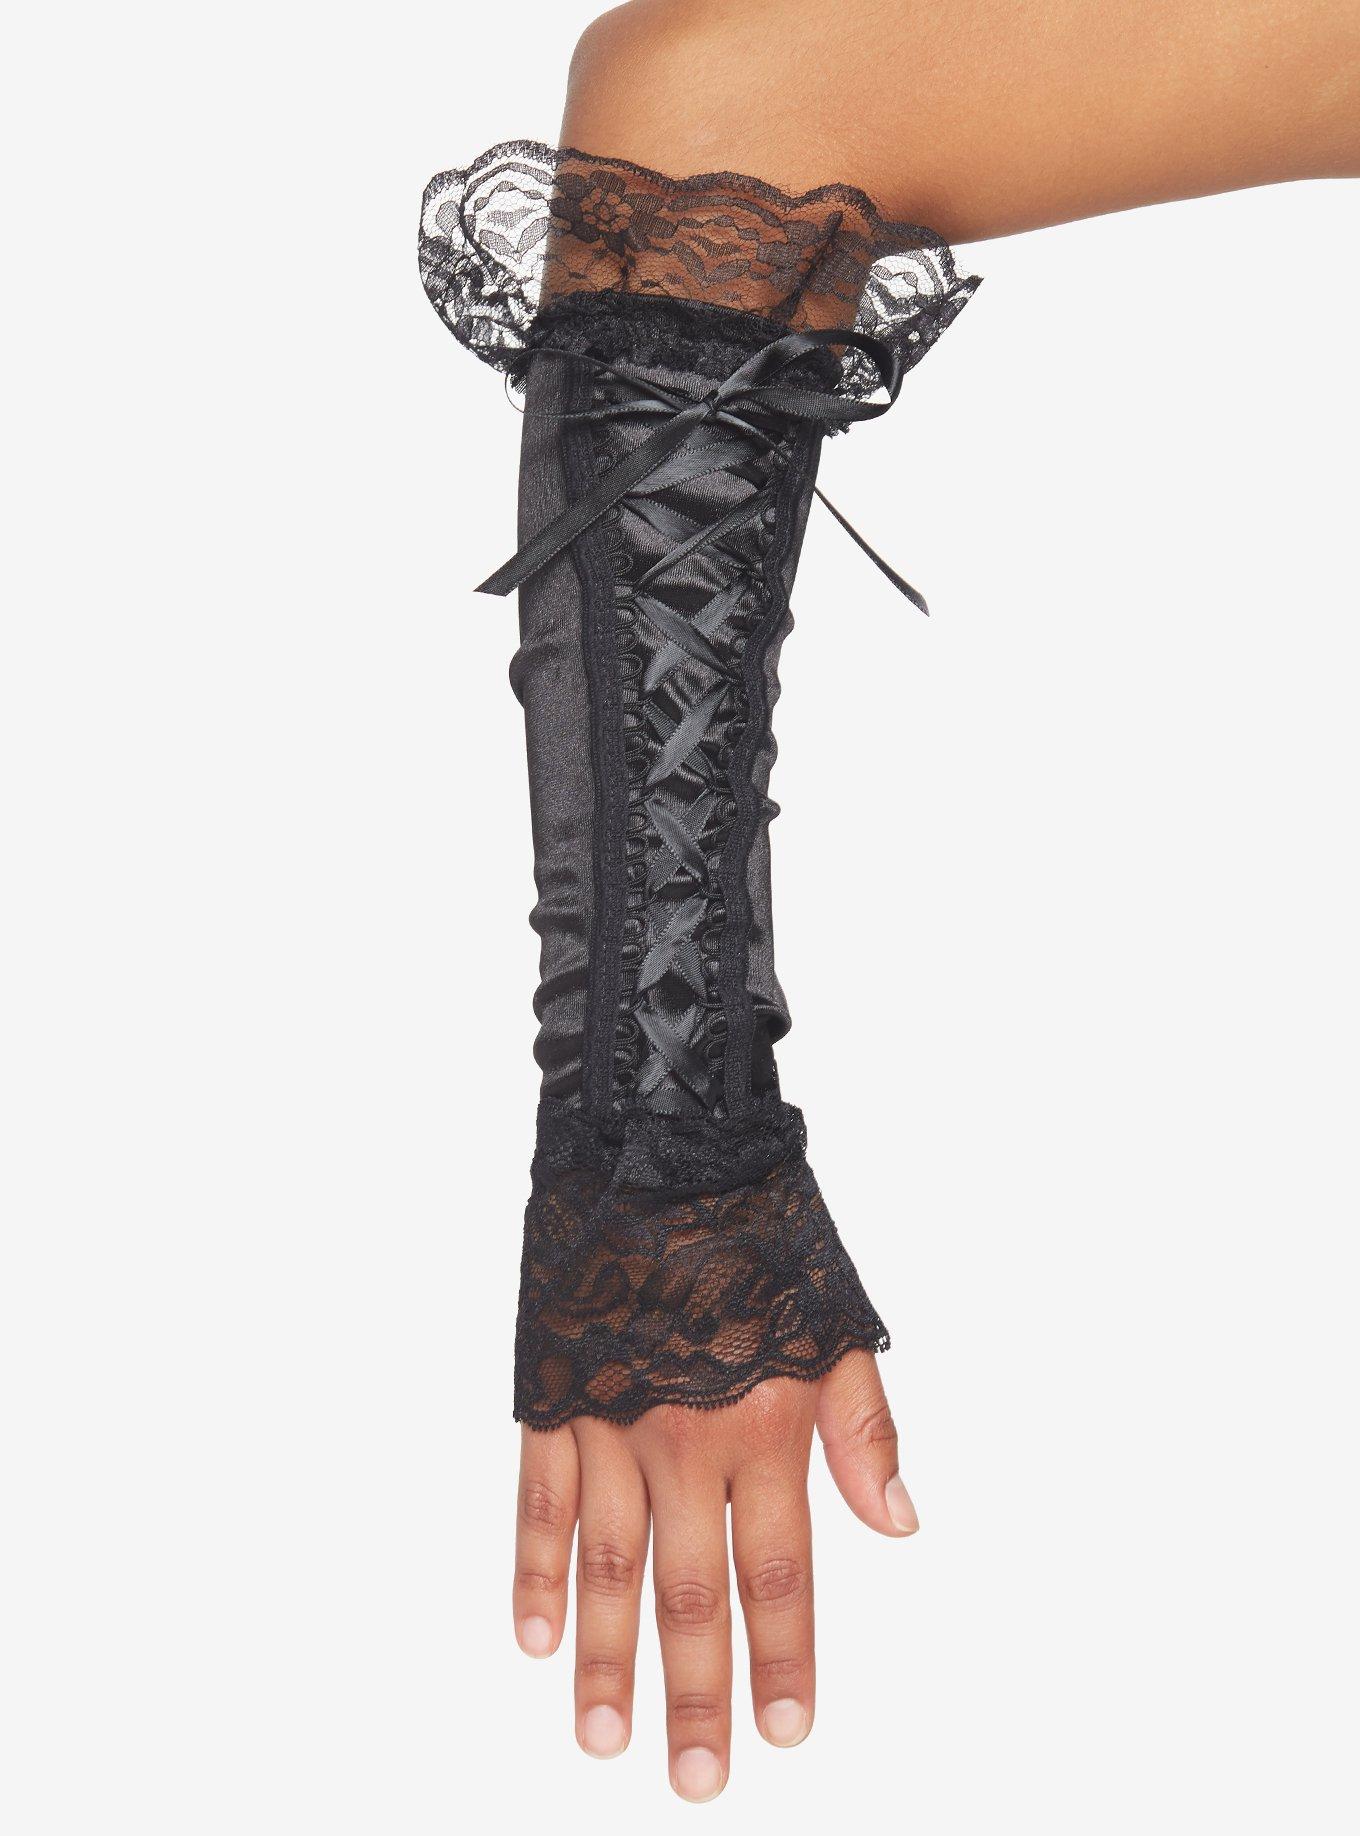 Black Ruffle Lace-Up Arm Warmers, , hi-res